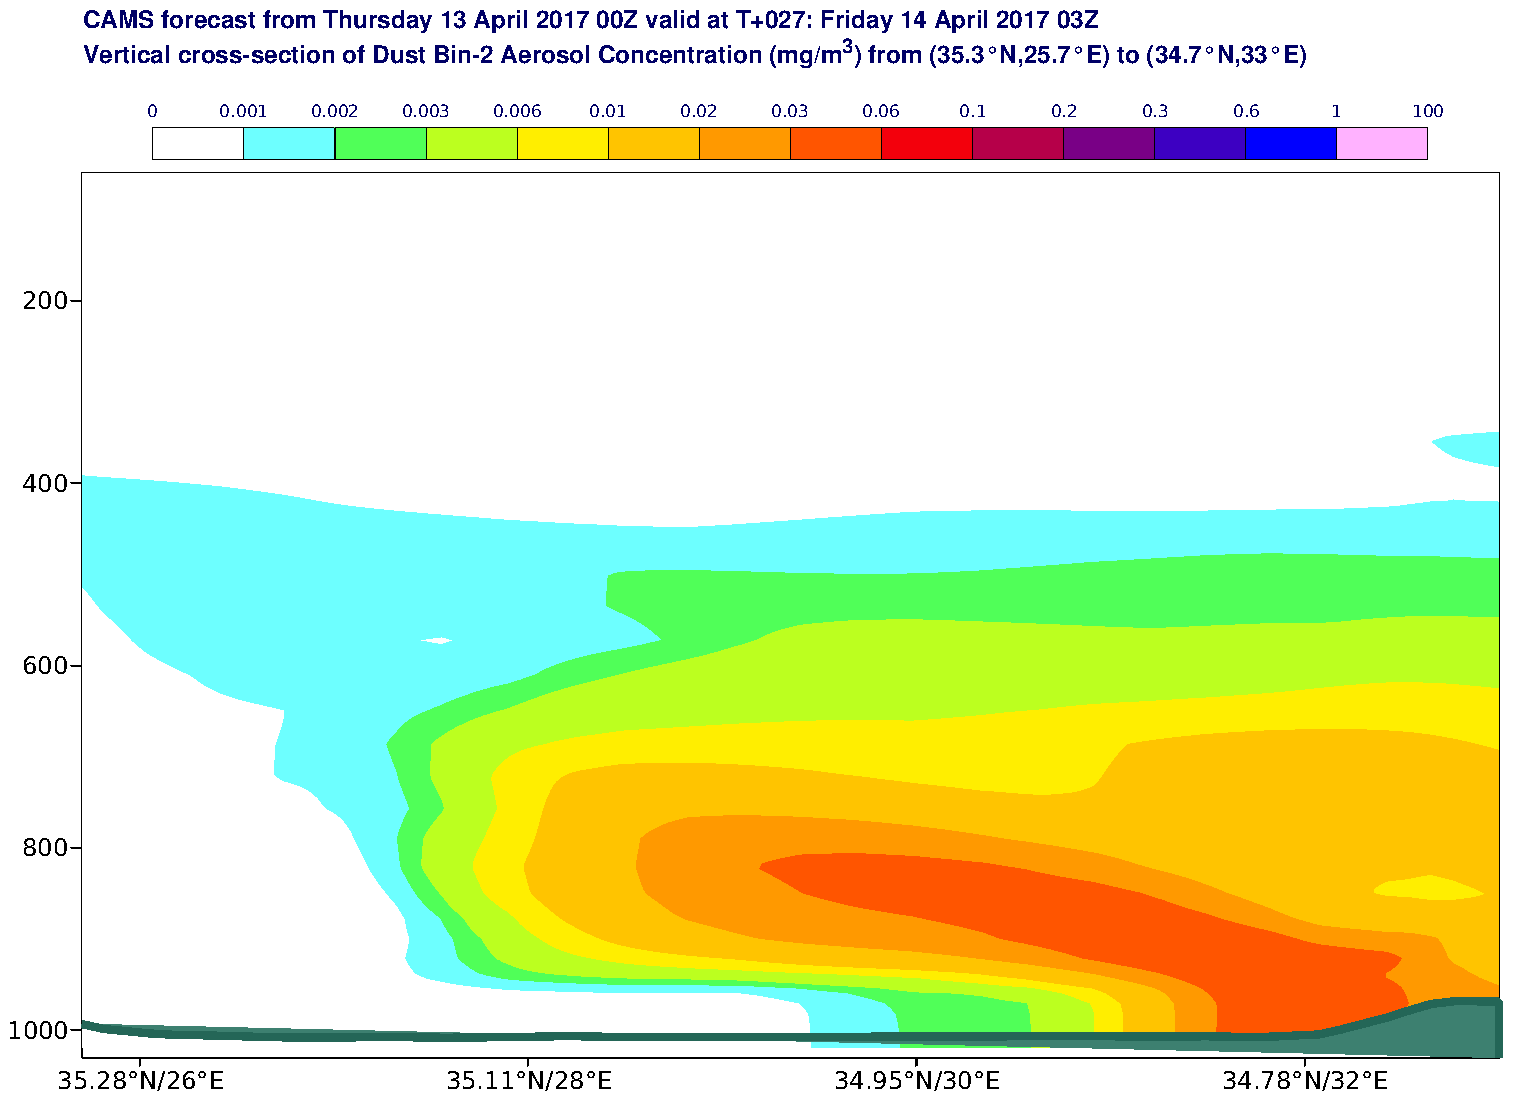 Vertical cross-section of Dust Bin-2 Aerosol Concentration (mg/m3) valid at T27 - 2017-04-14 03:00